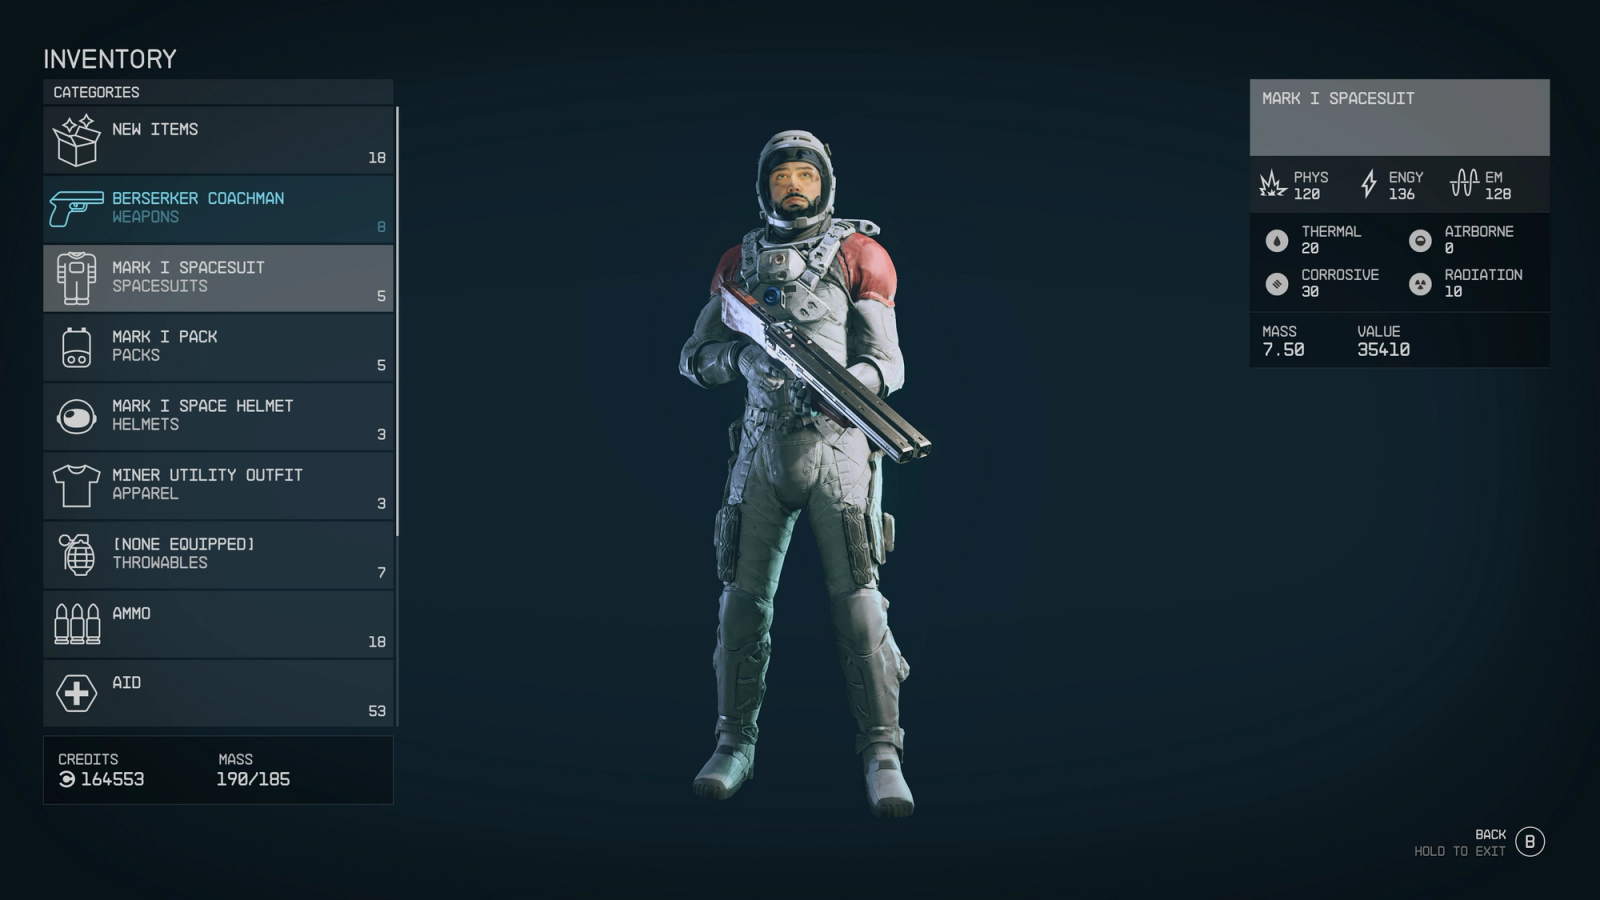 character wearing the mark 1 space suit